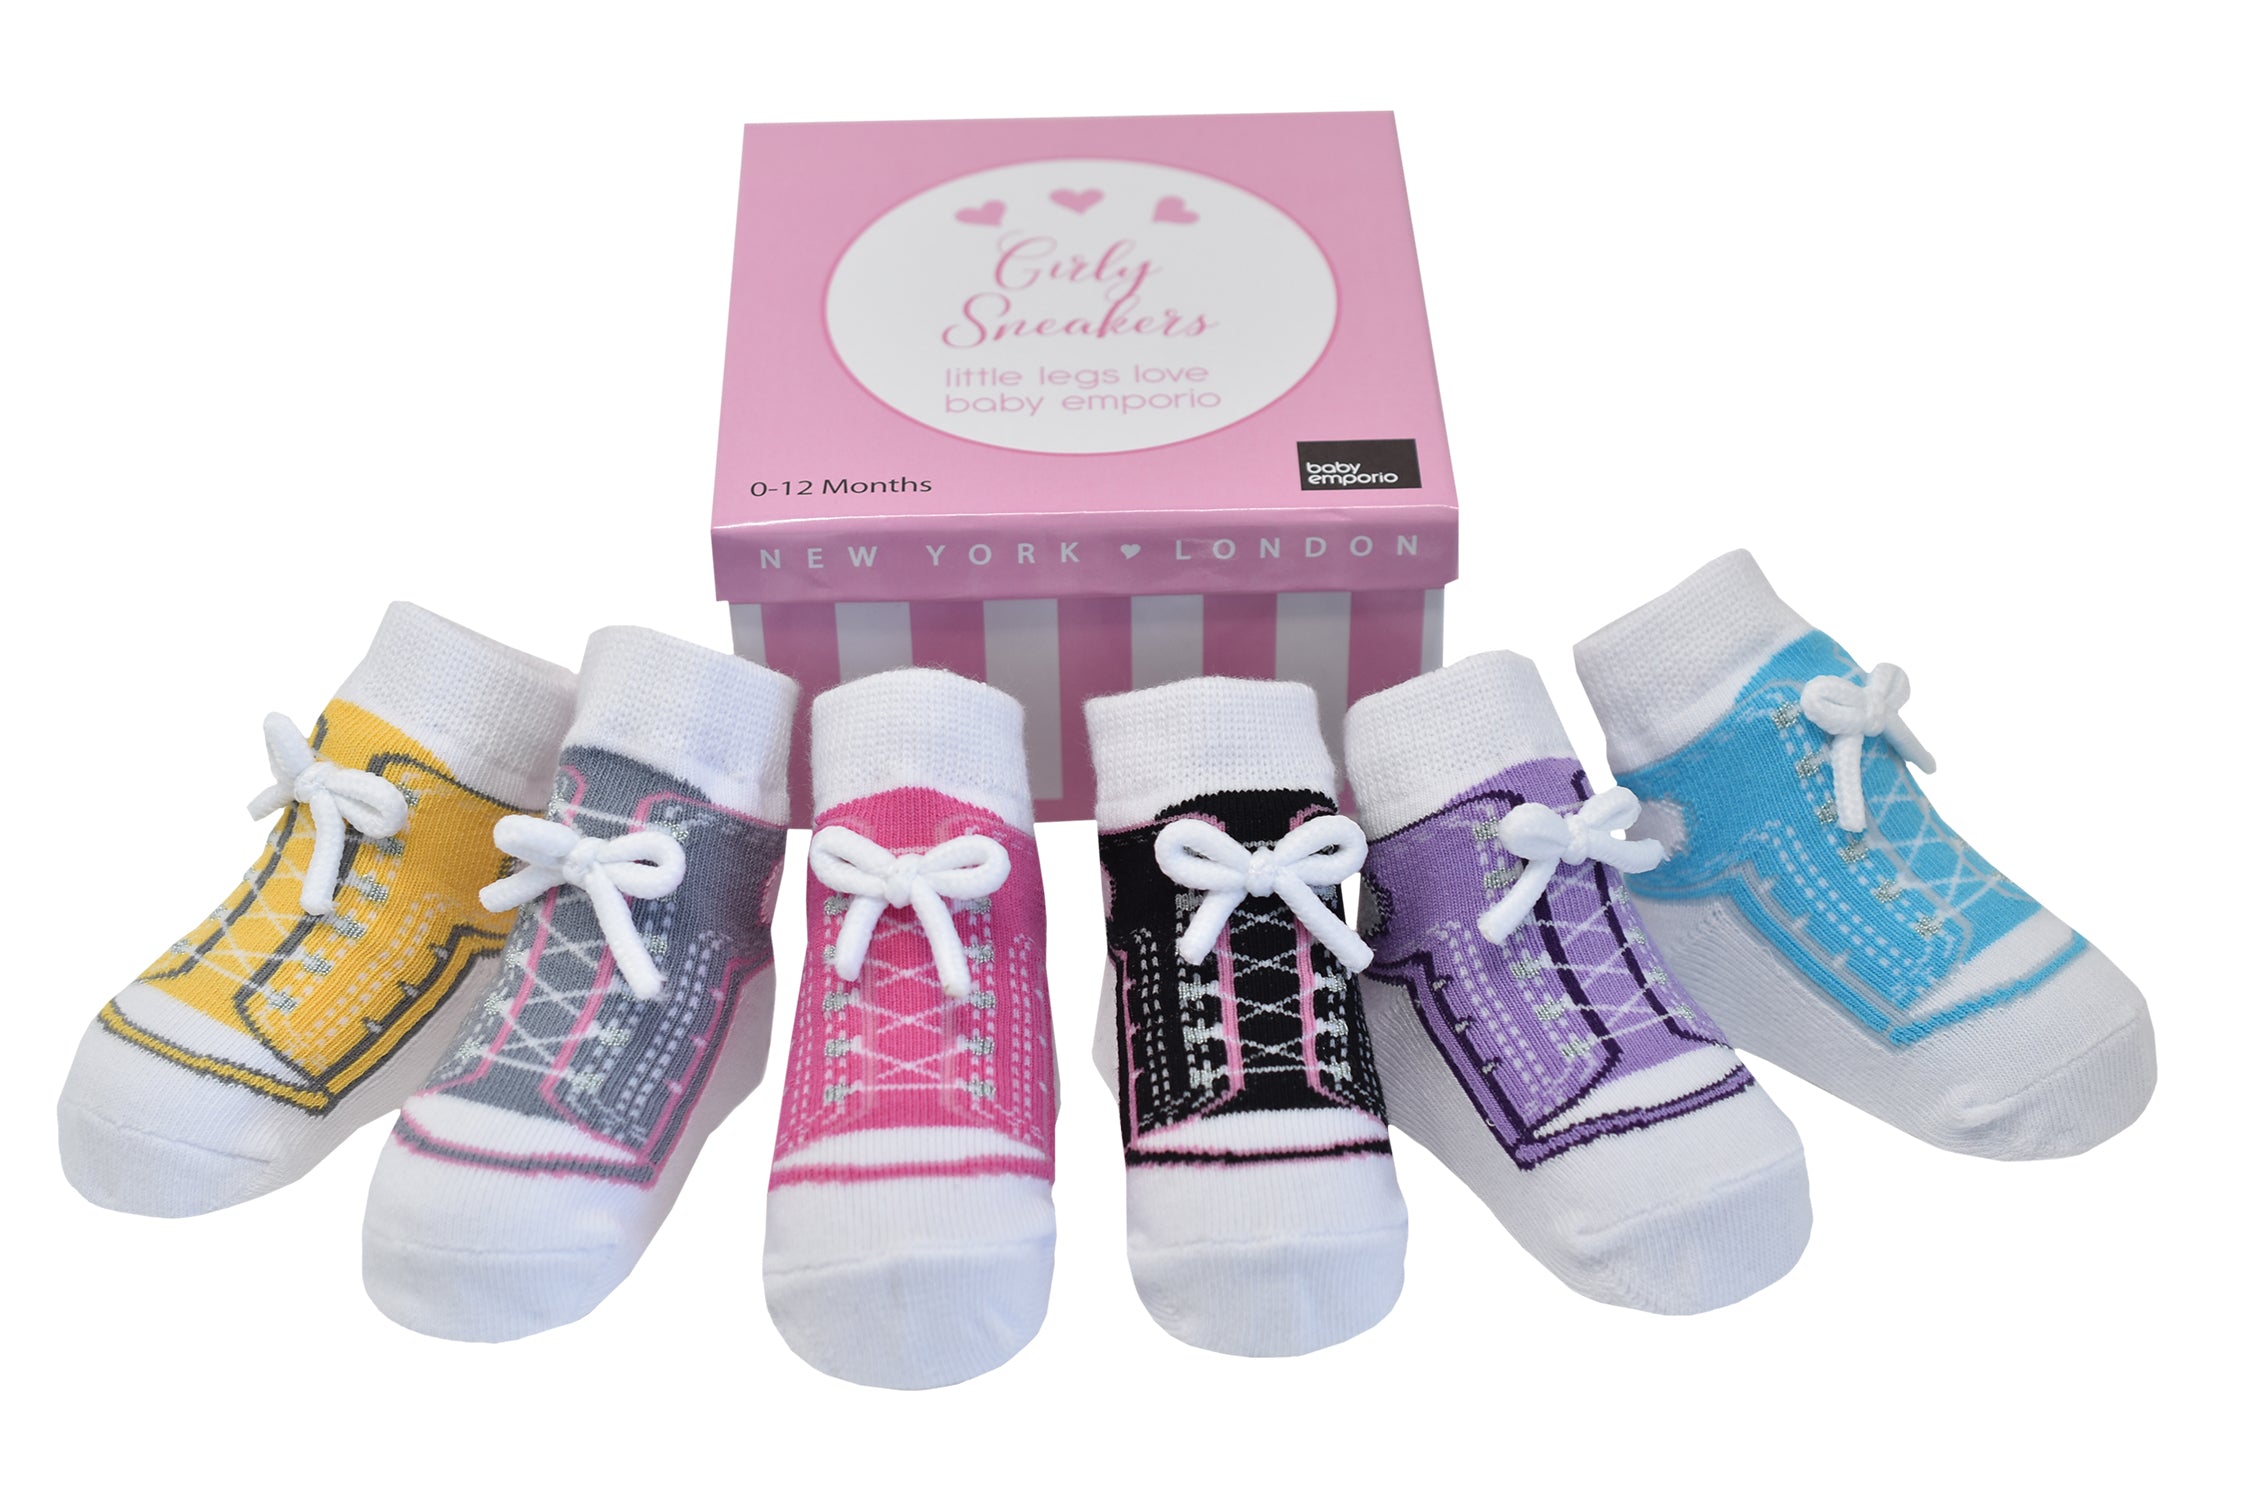 Baby girl socks that look like sneaker socks 6 pairs with faux shoe laces in a gift box for baby girl 0-12 months